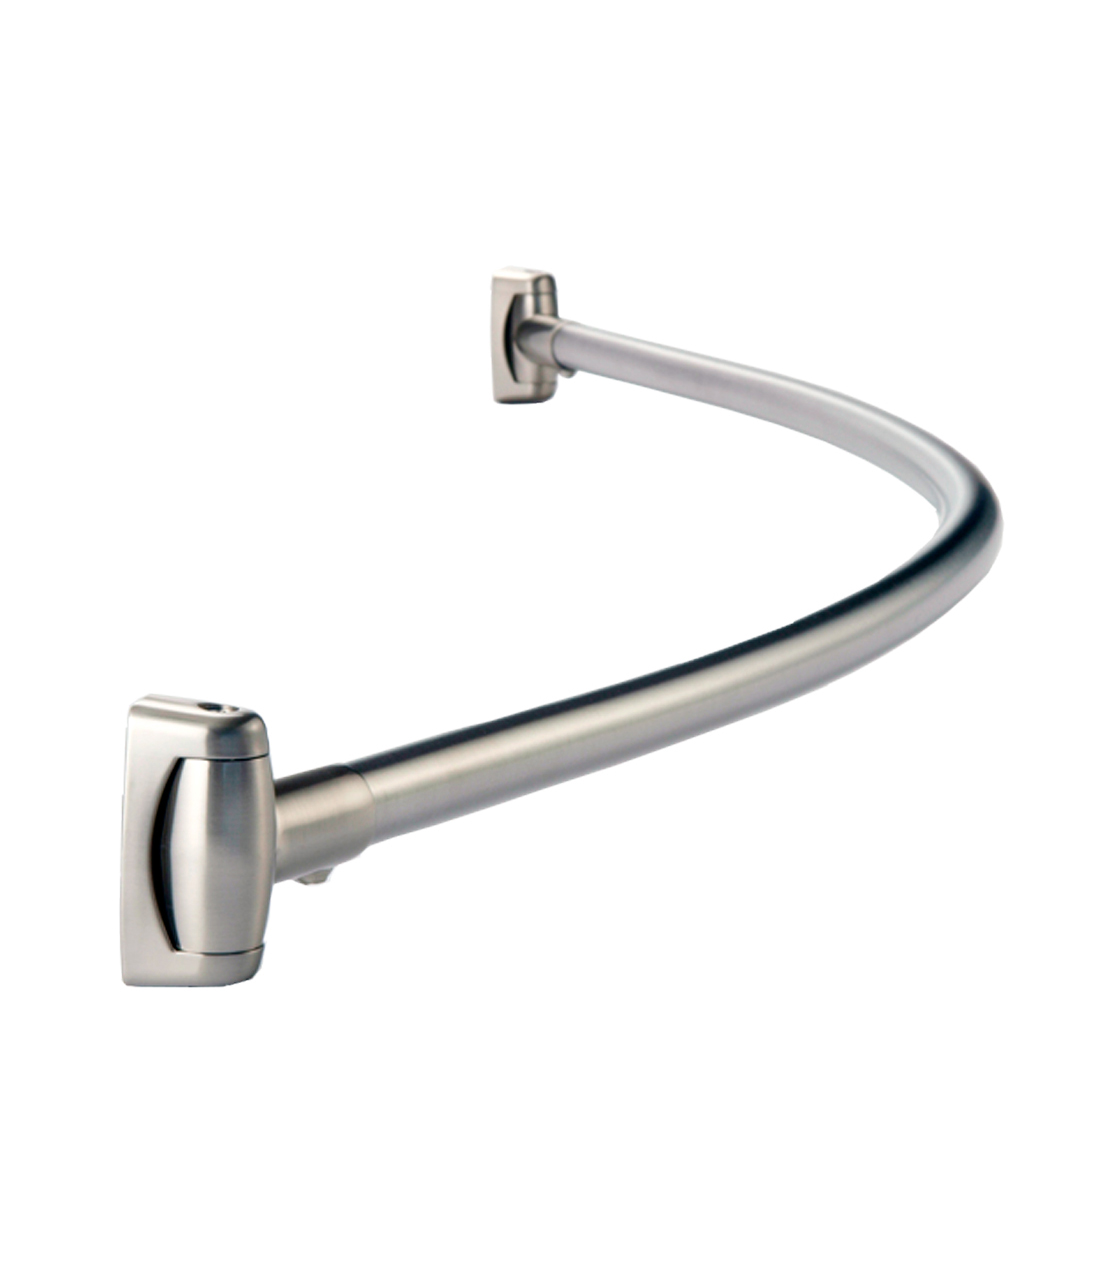 Chrome DuraHold by Creative Escapes Bath Collection Curved Tension Shower Curtain Rod 